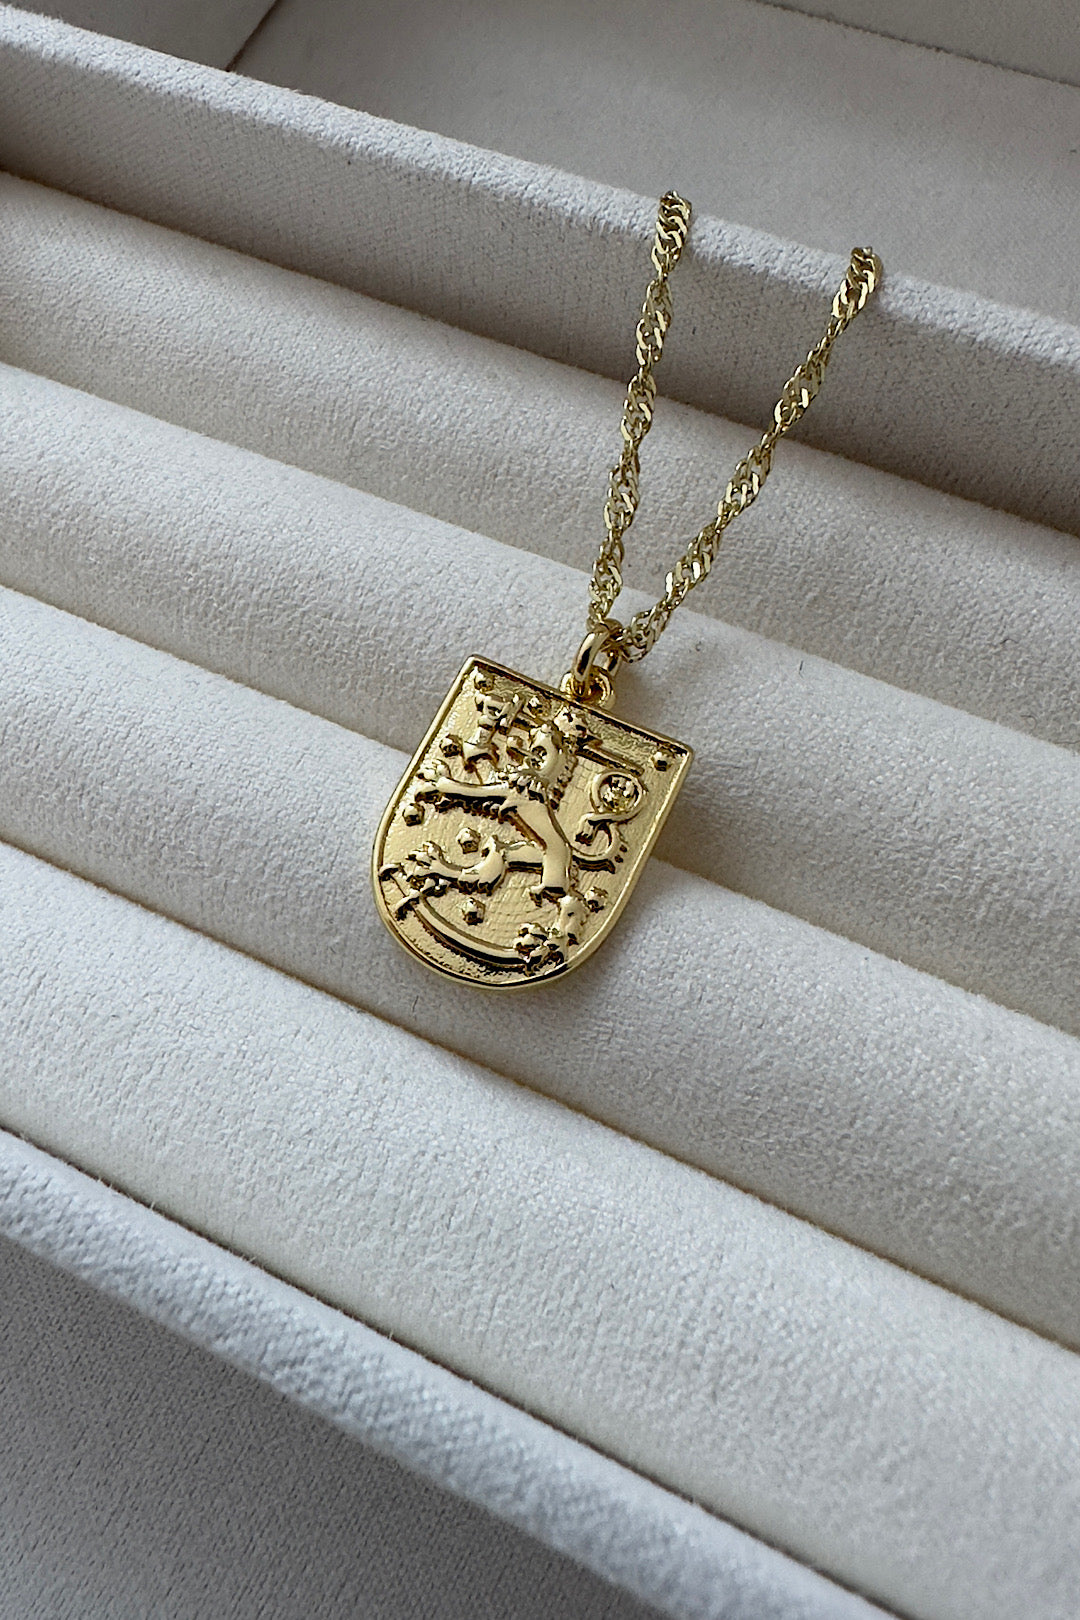 Finland Coat of Arms Gold Swirl Necklace 